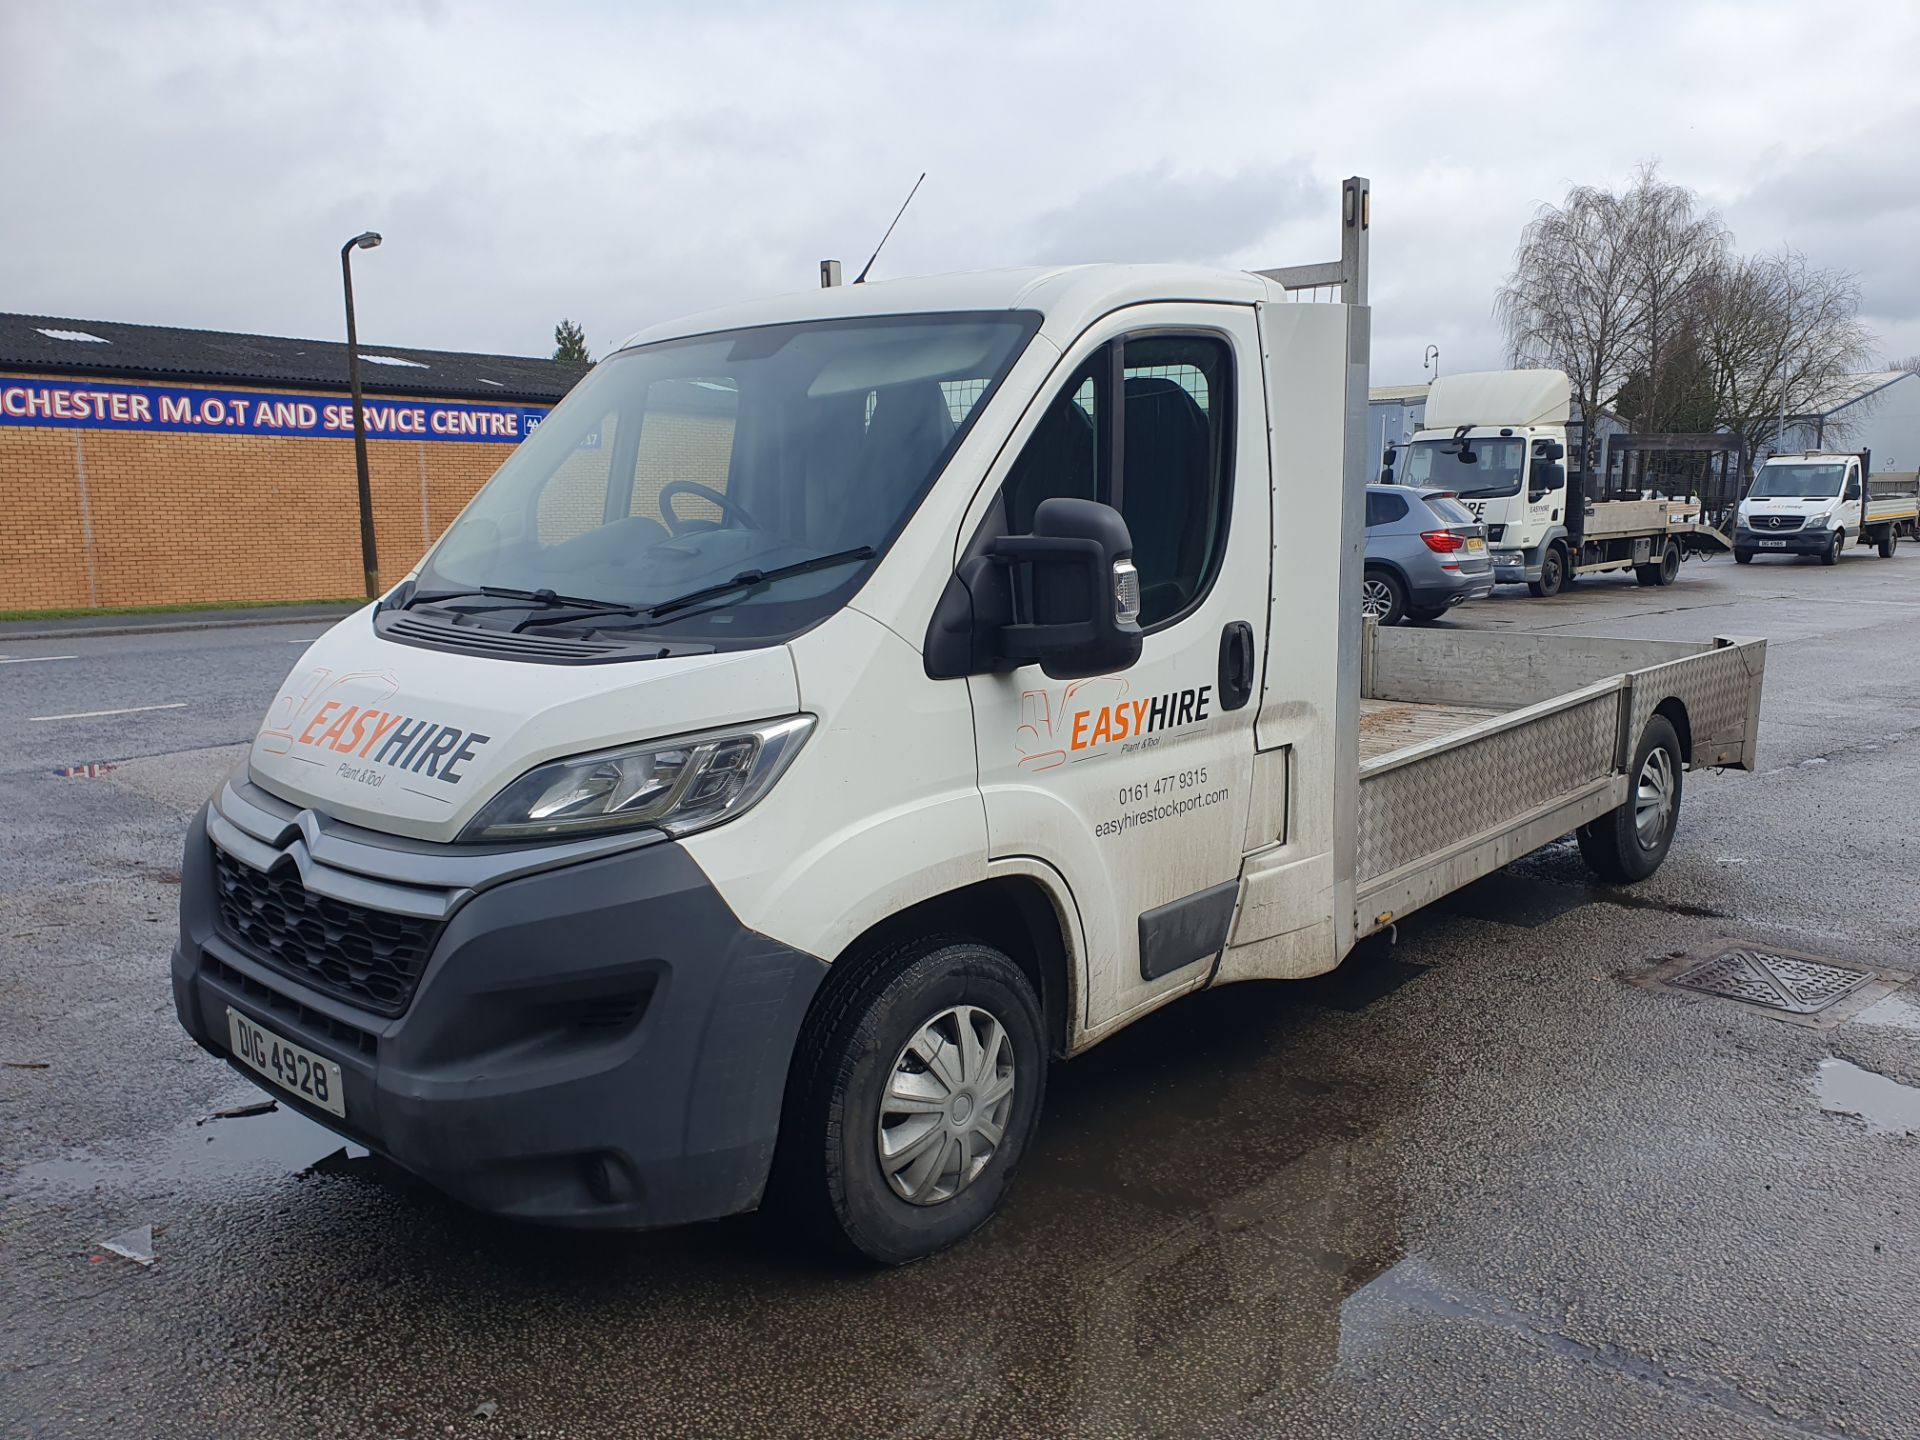 Citroen Relay X2-50 Flat Lorry w/ Loading Ramp Sides | DIG 4928 | 148,060 Miles - Image 9 of 20